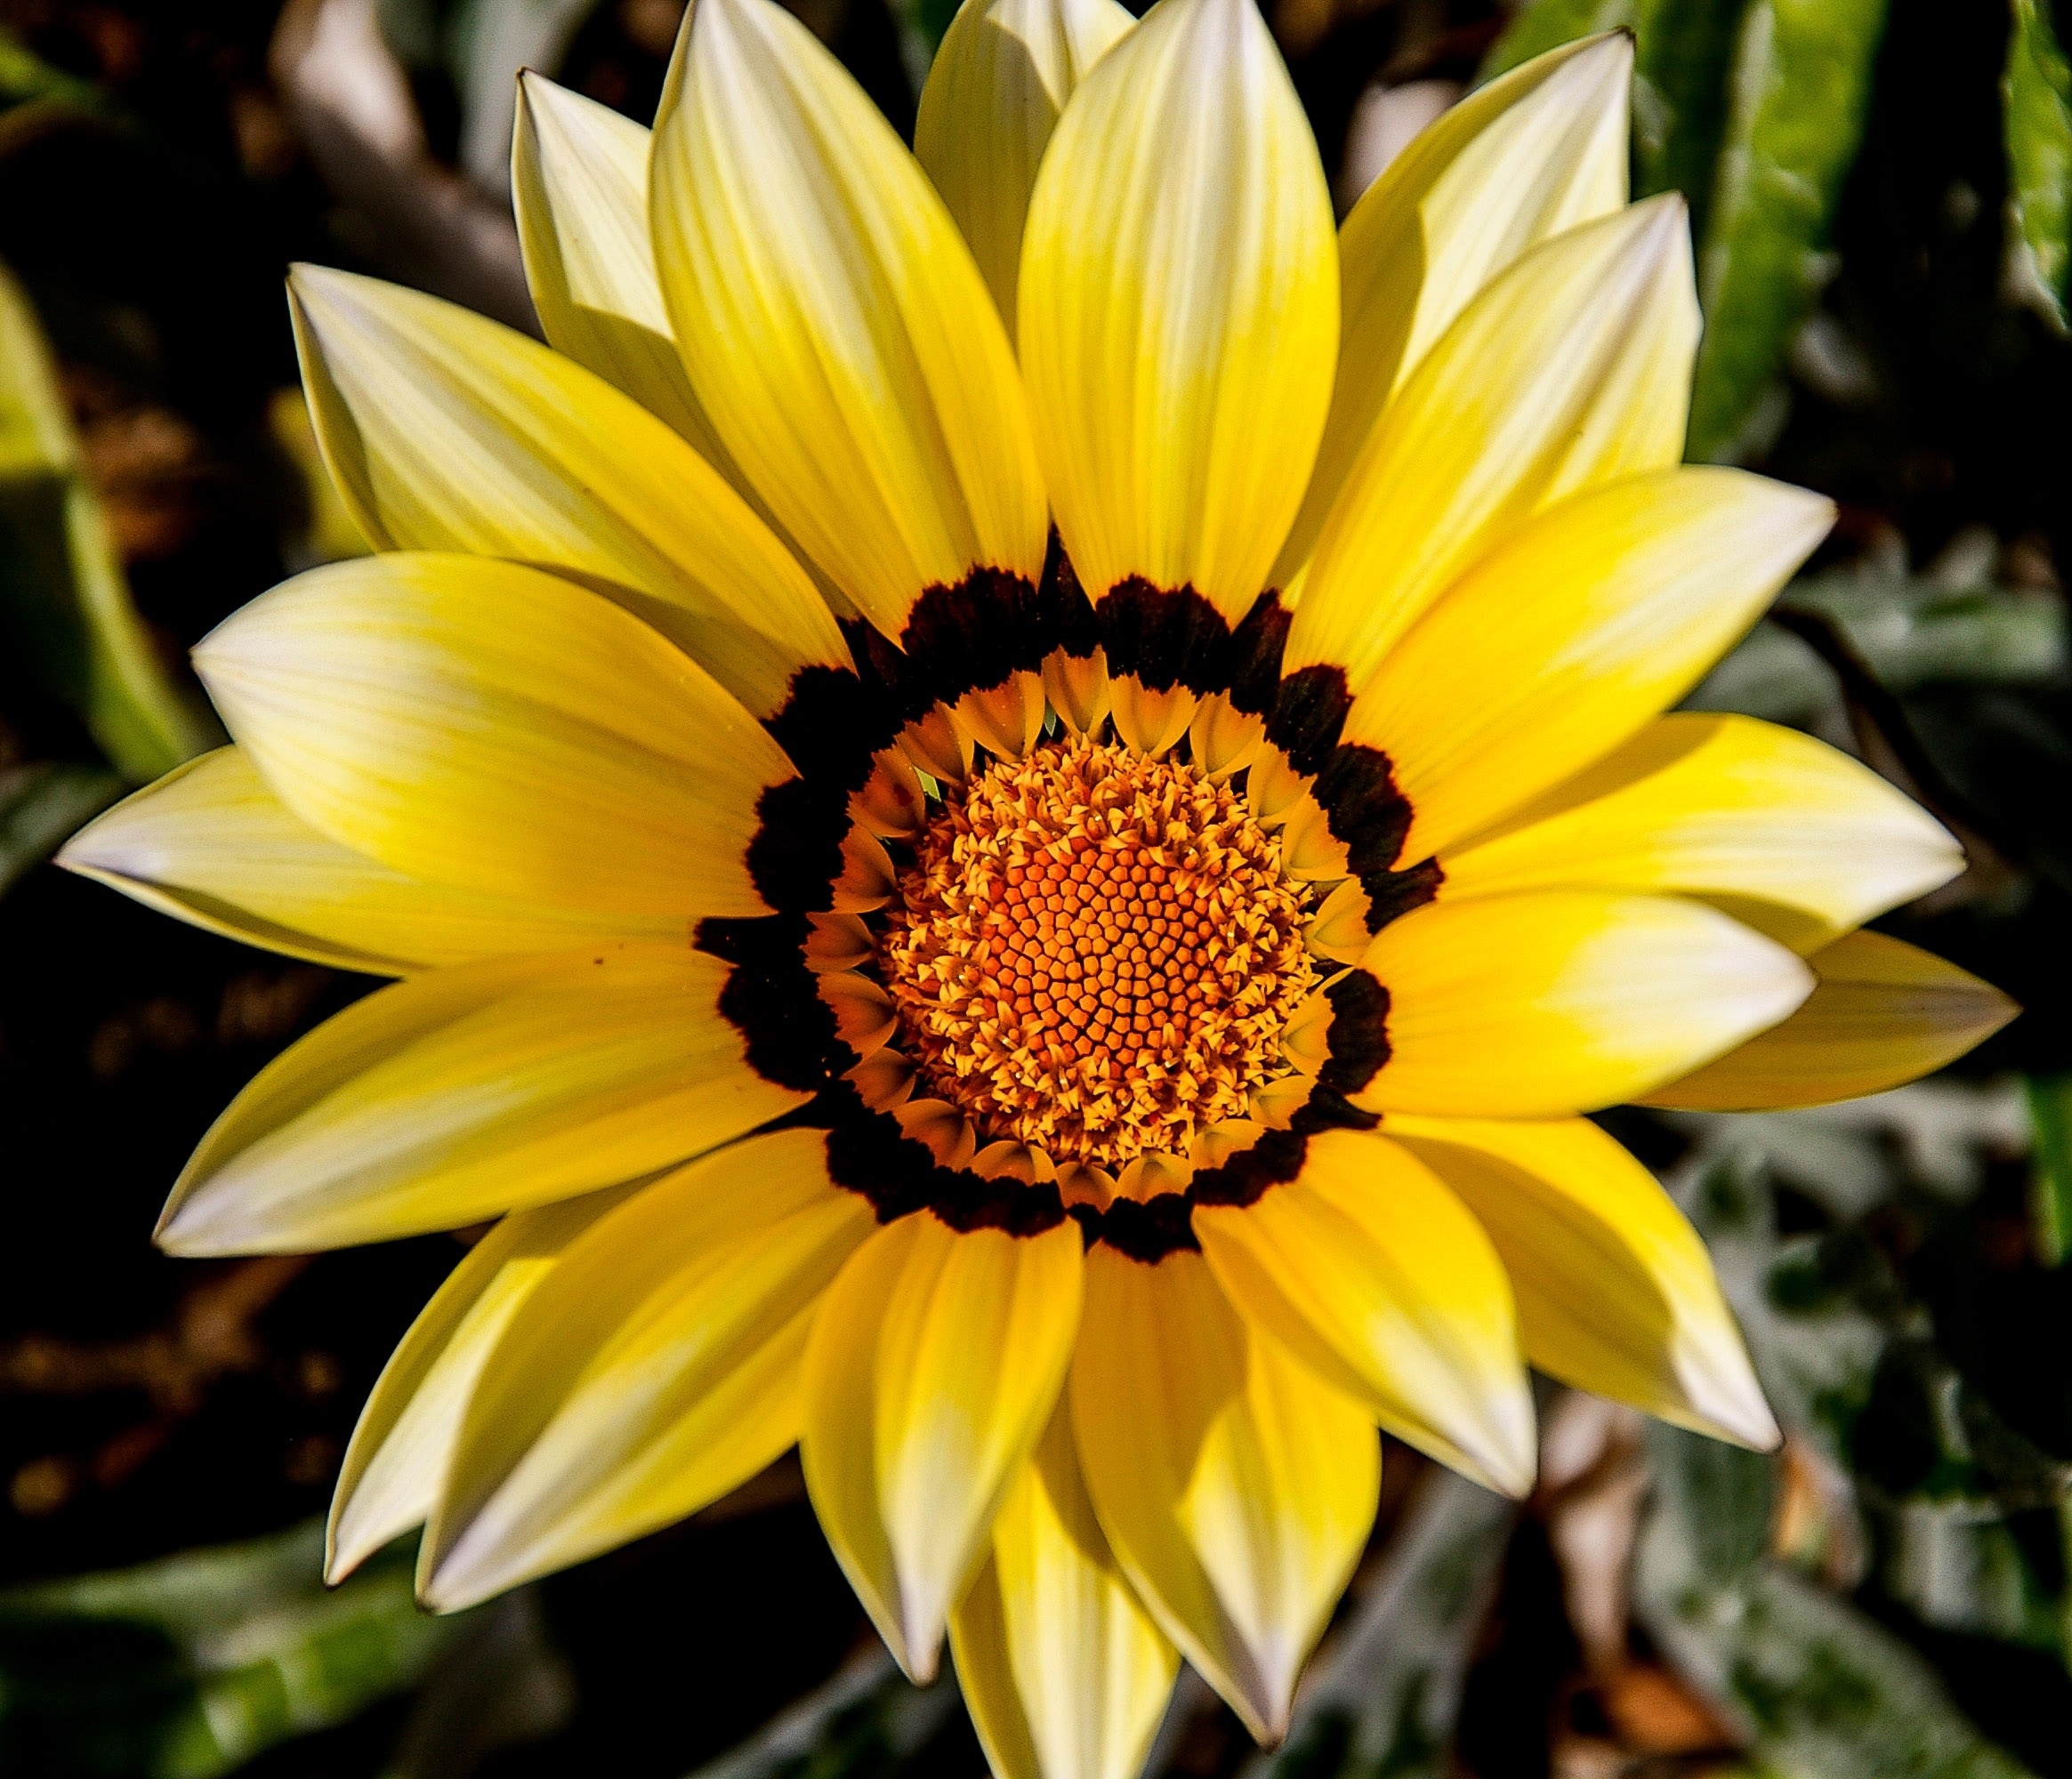 yellow and white petaled flower